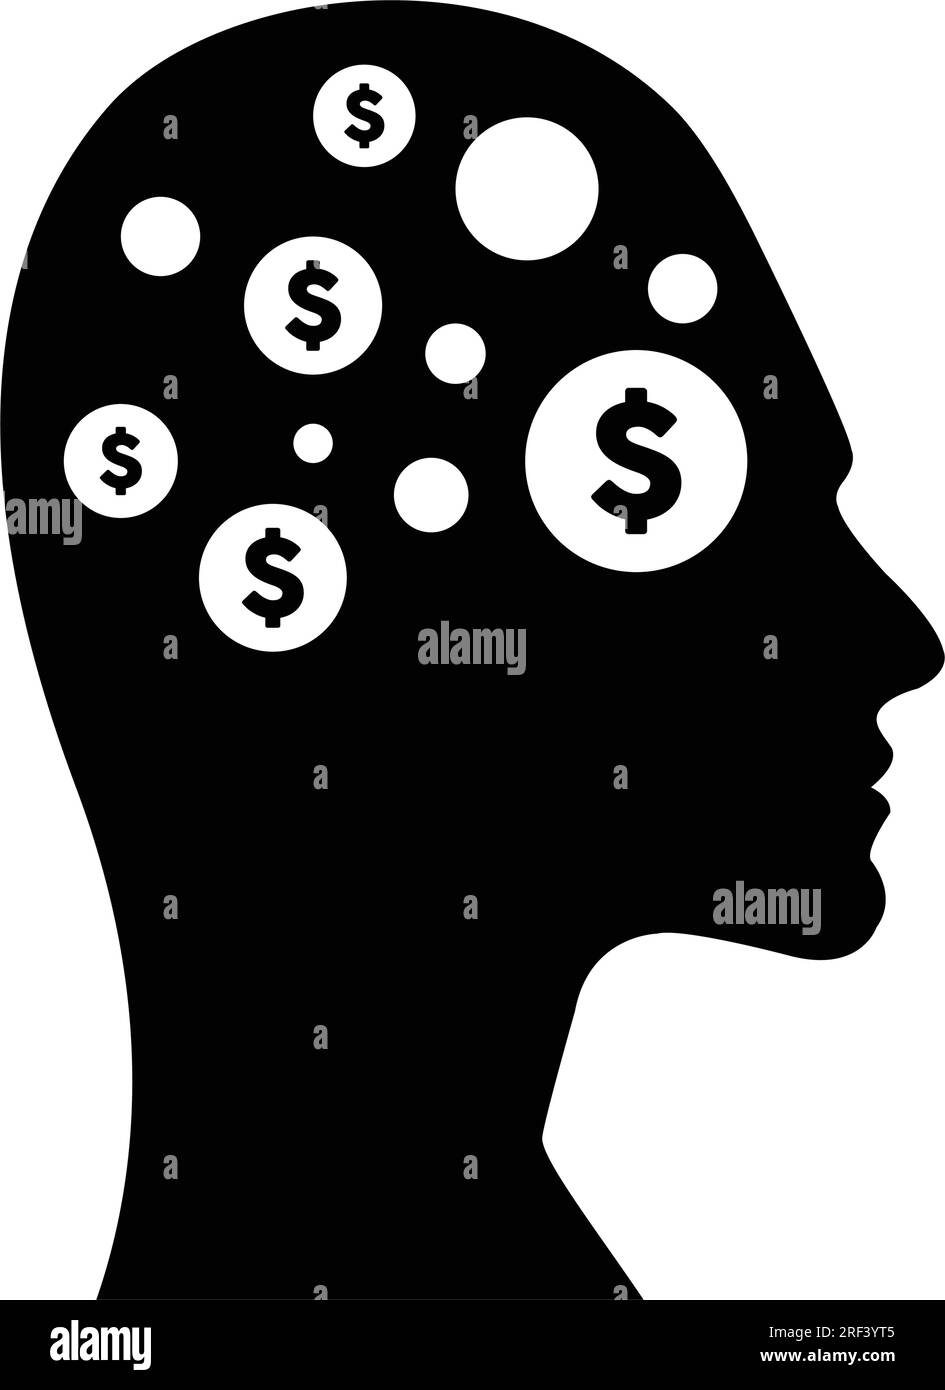 A digital dollar sign icon is displayed on a futuristic human profile face with a brain chip implant for artificial intelligence finance and money min Stock Vector